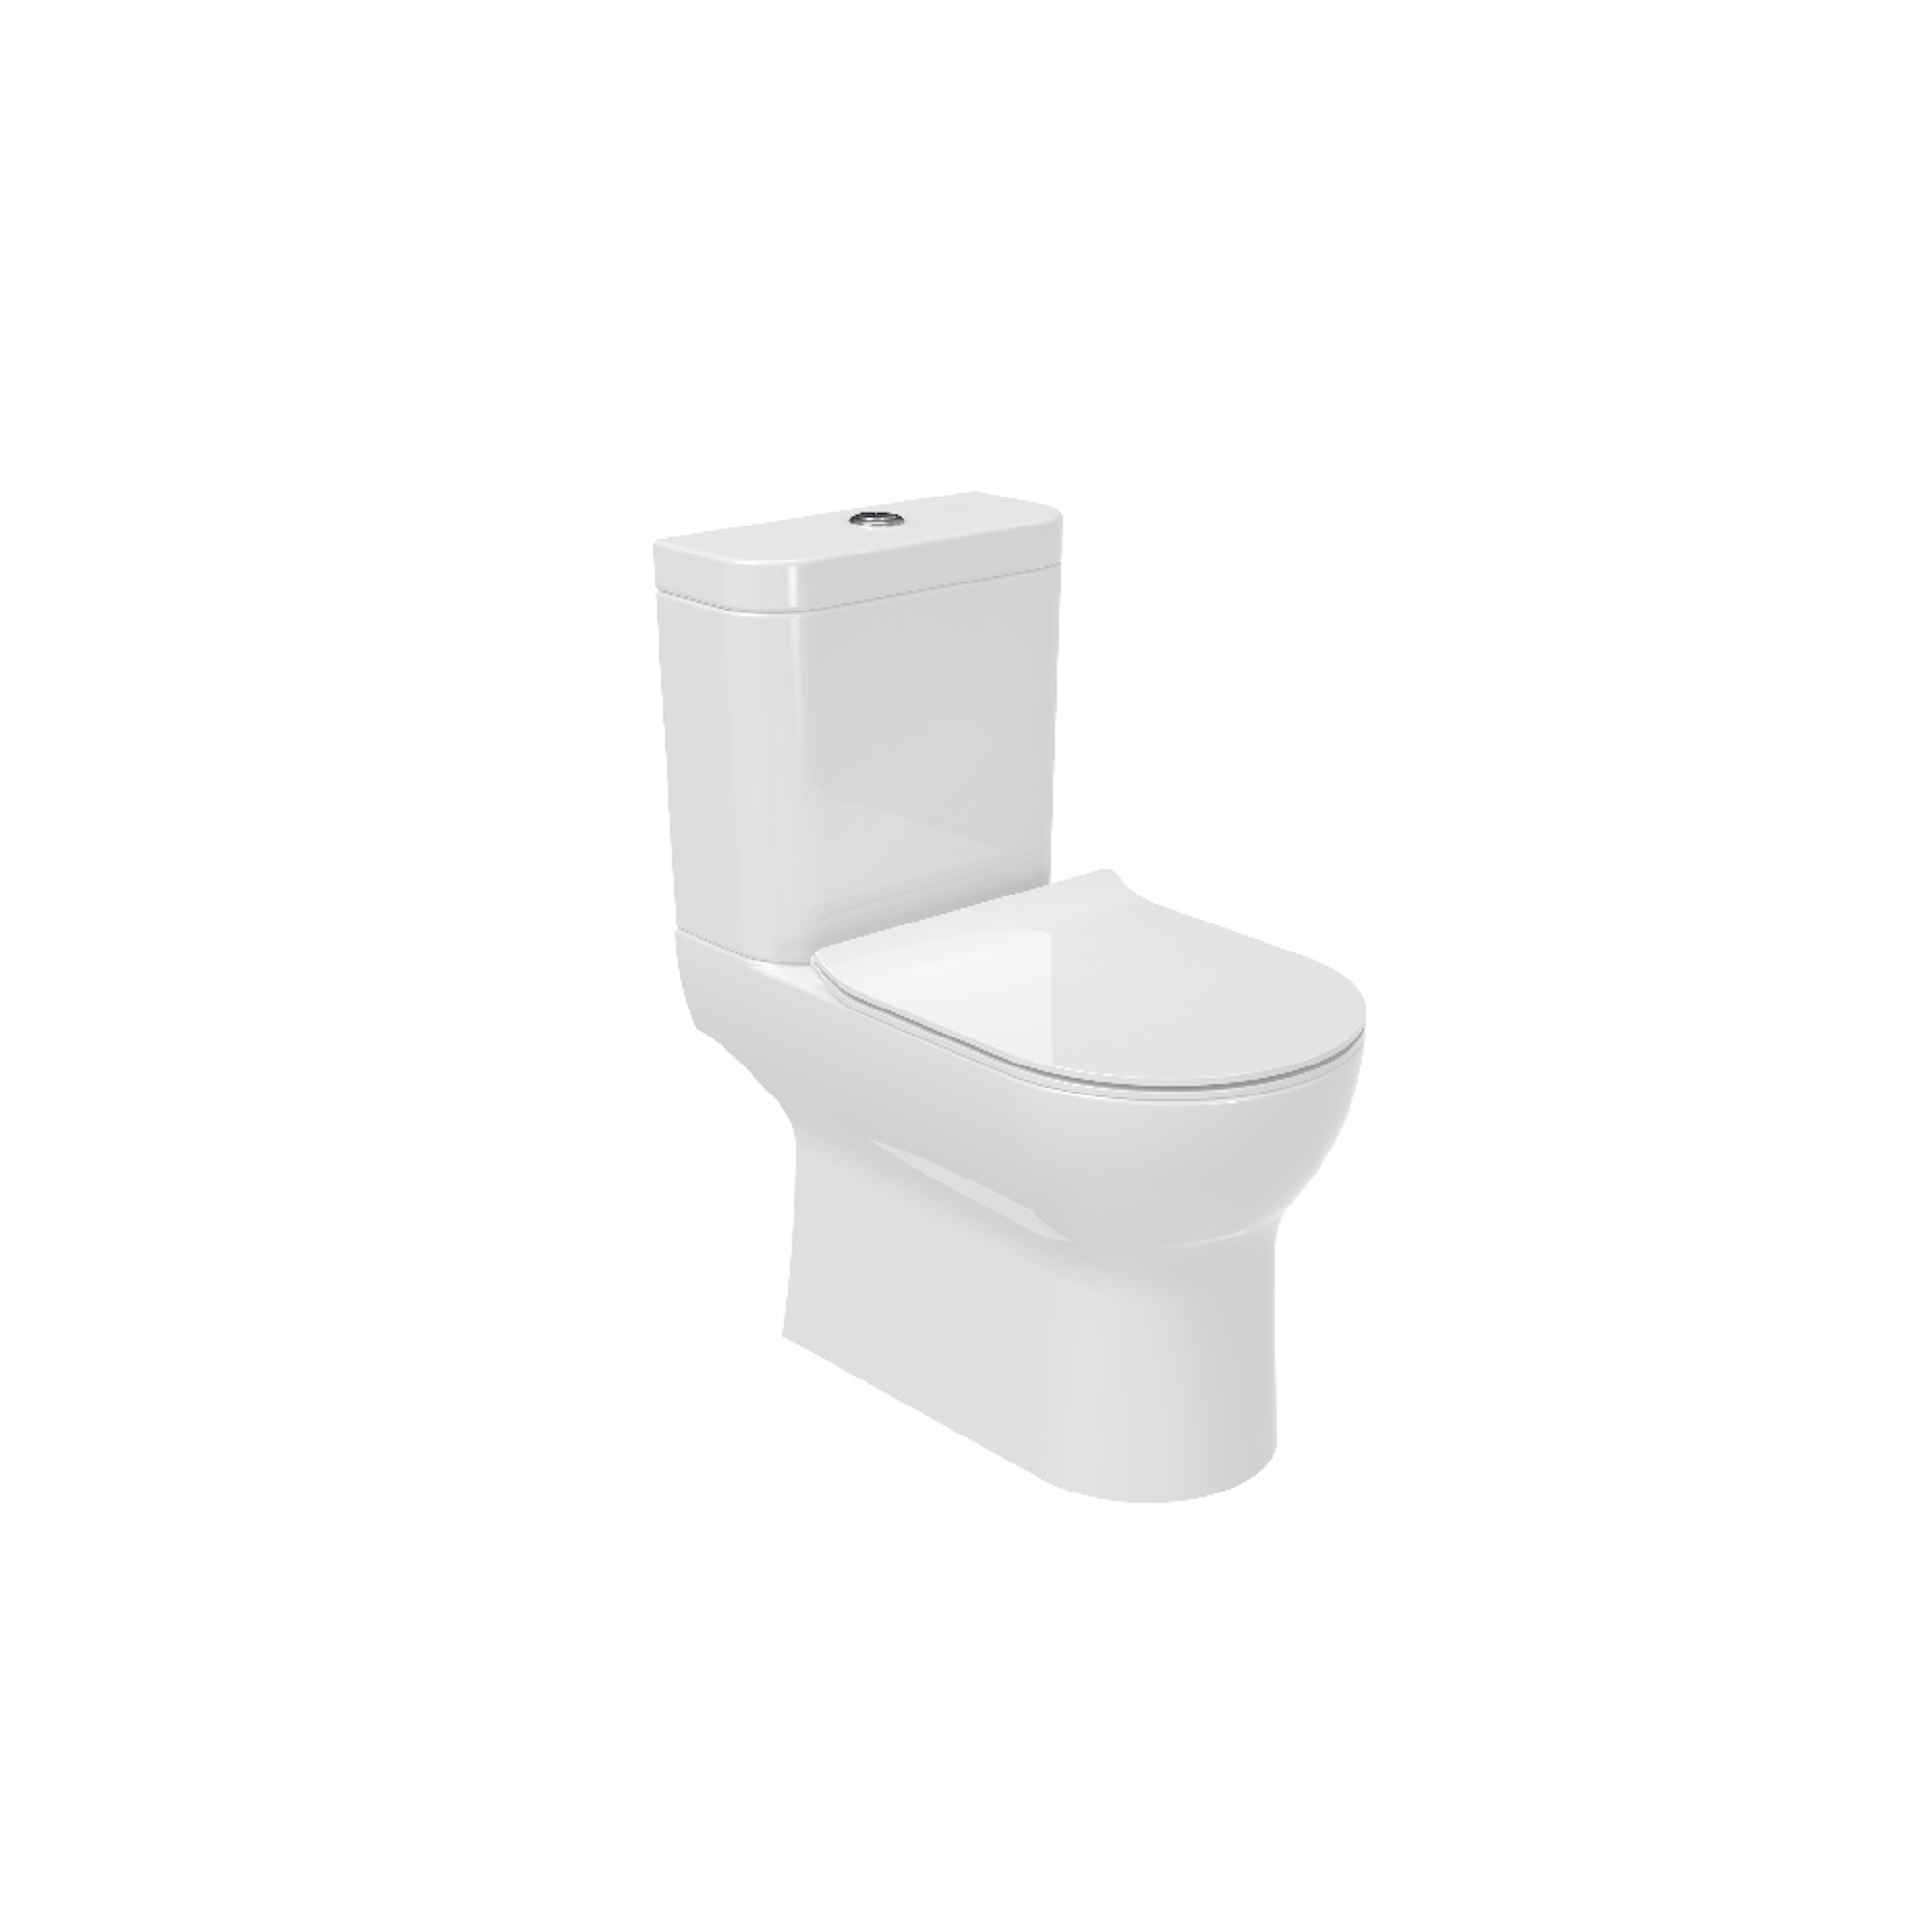 The Saneux AIR Close Coupled Toilet